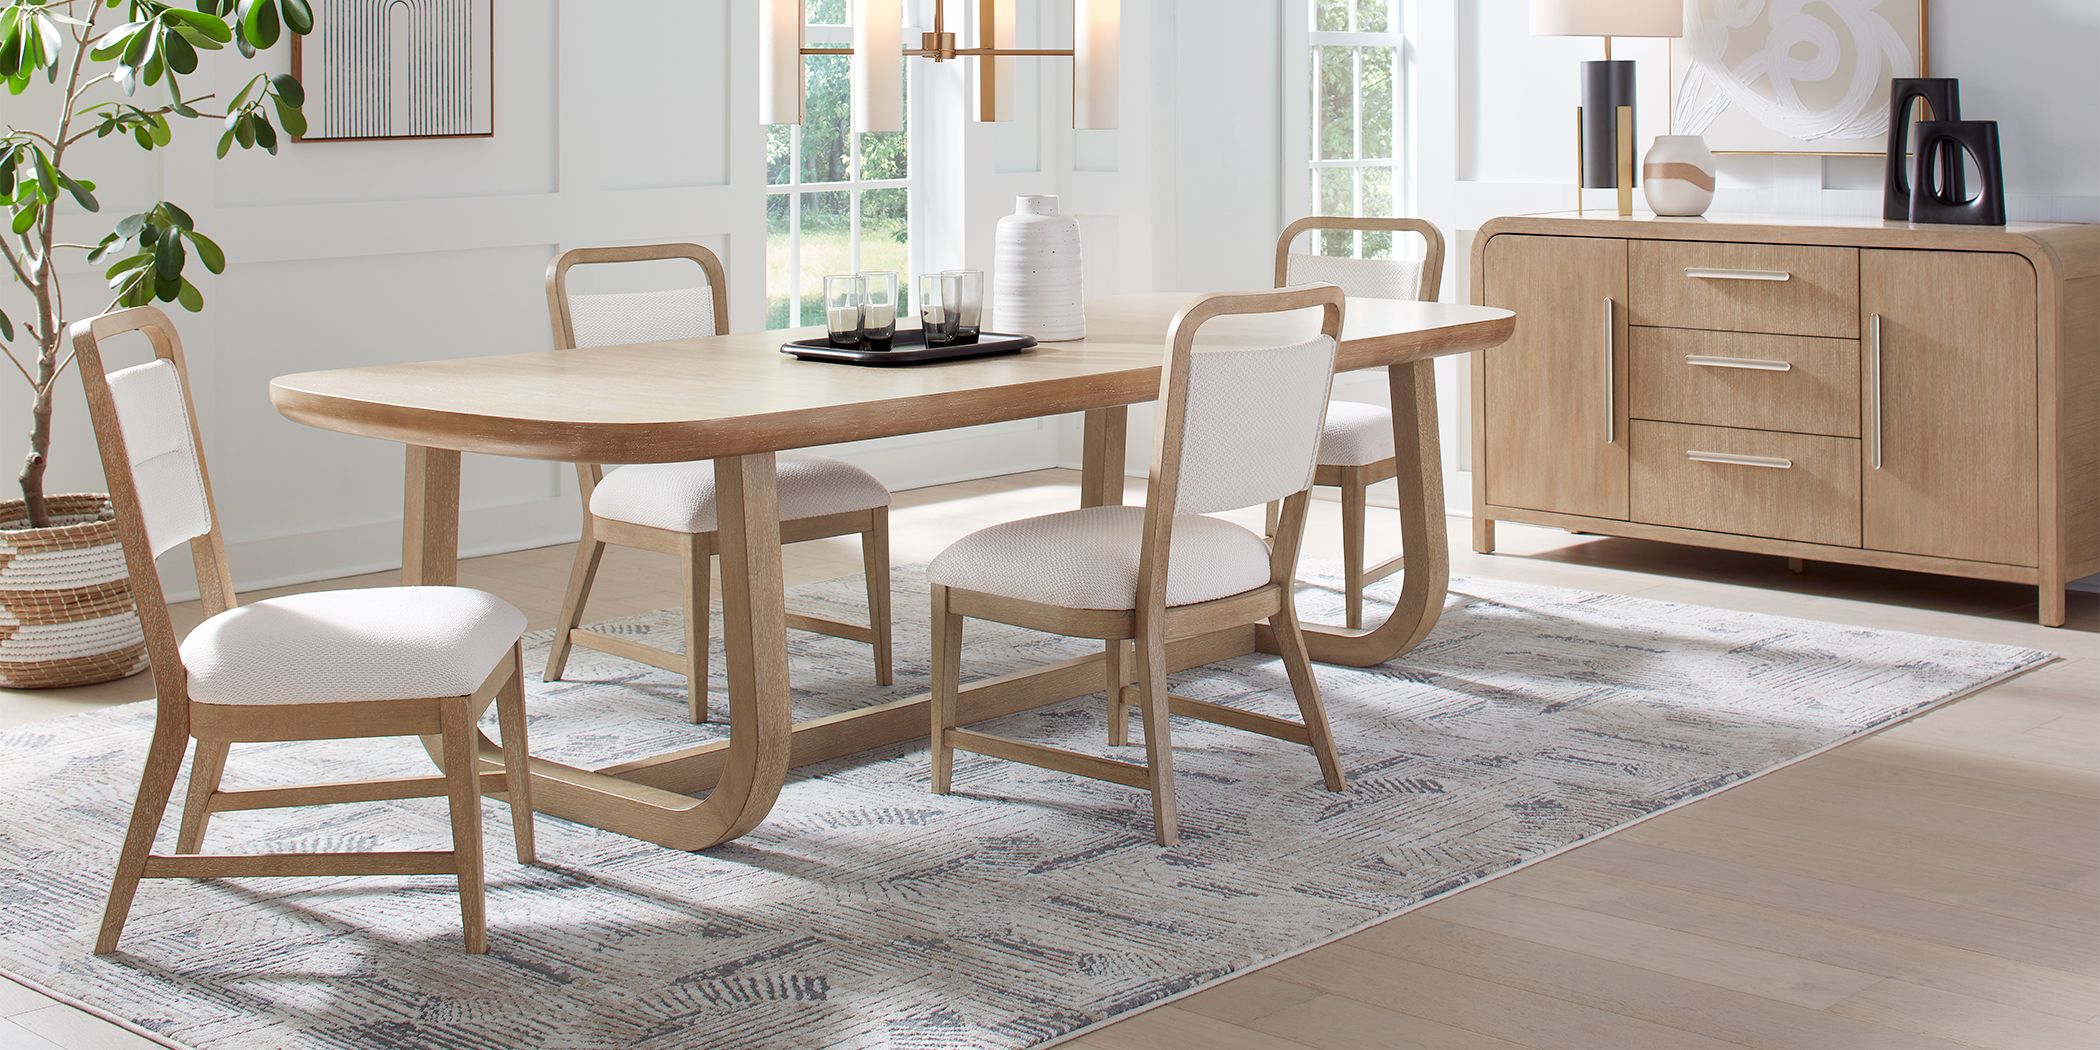 Canyon Sandstone 5 Pc Dining Room with Upholstered Chairs